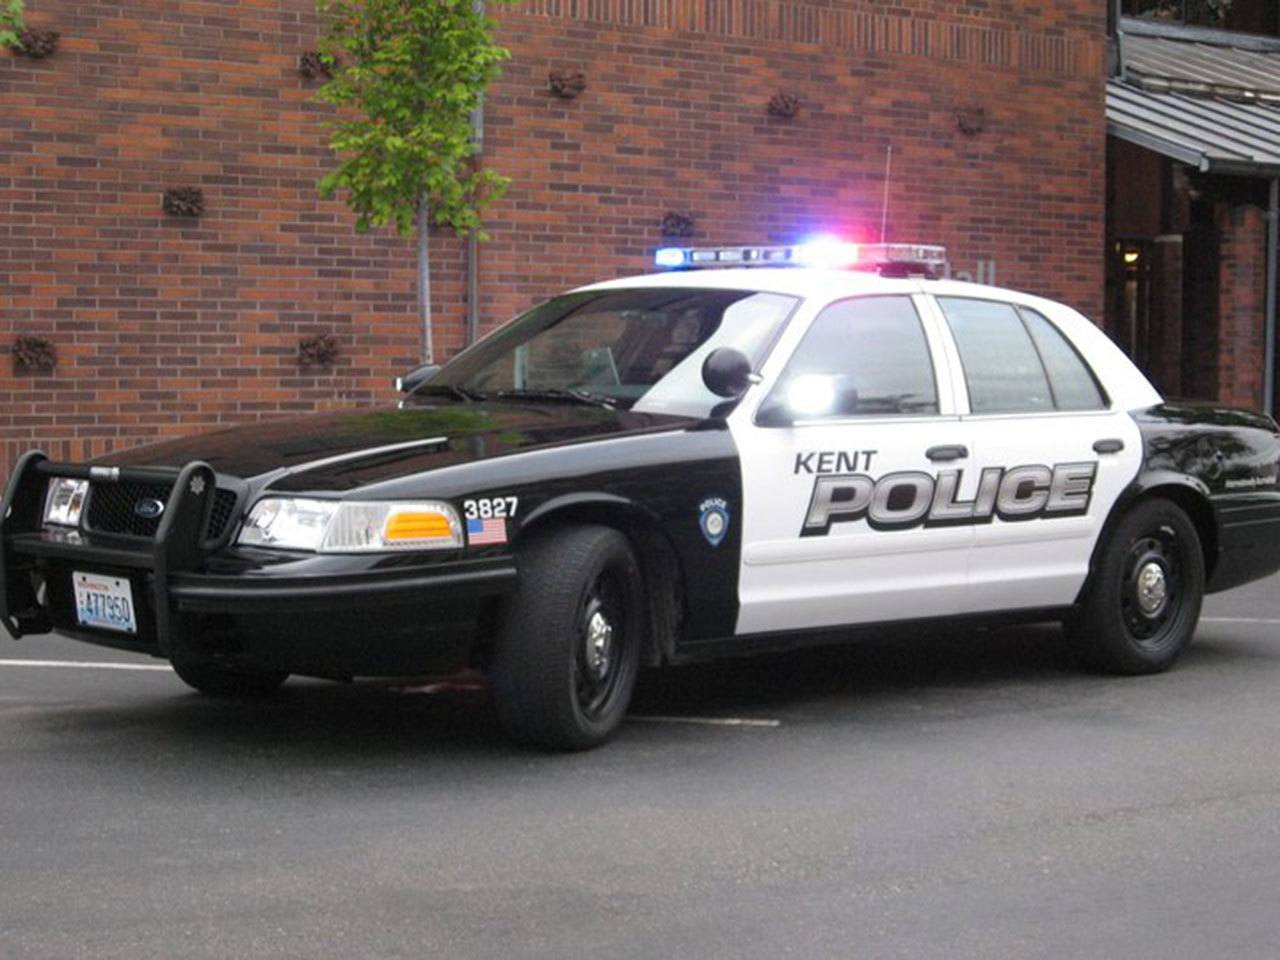 Kent Police overtime costs hit $1.5 million per year